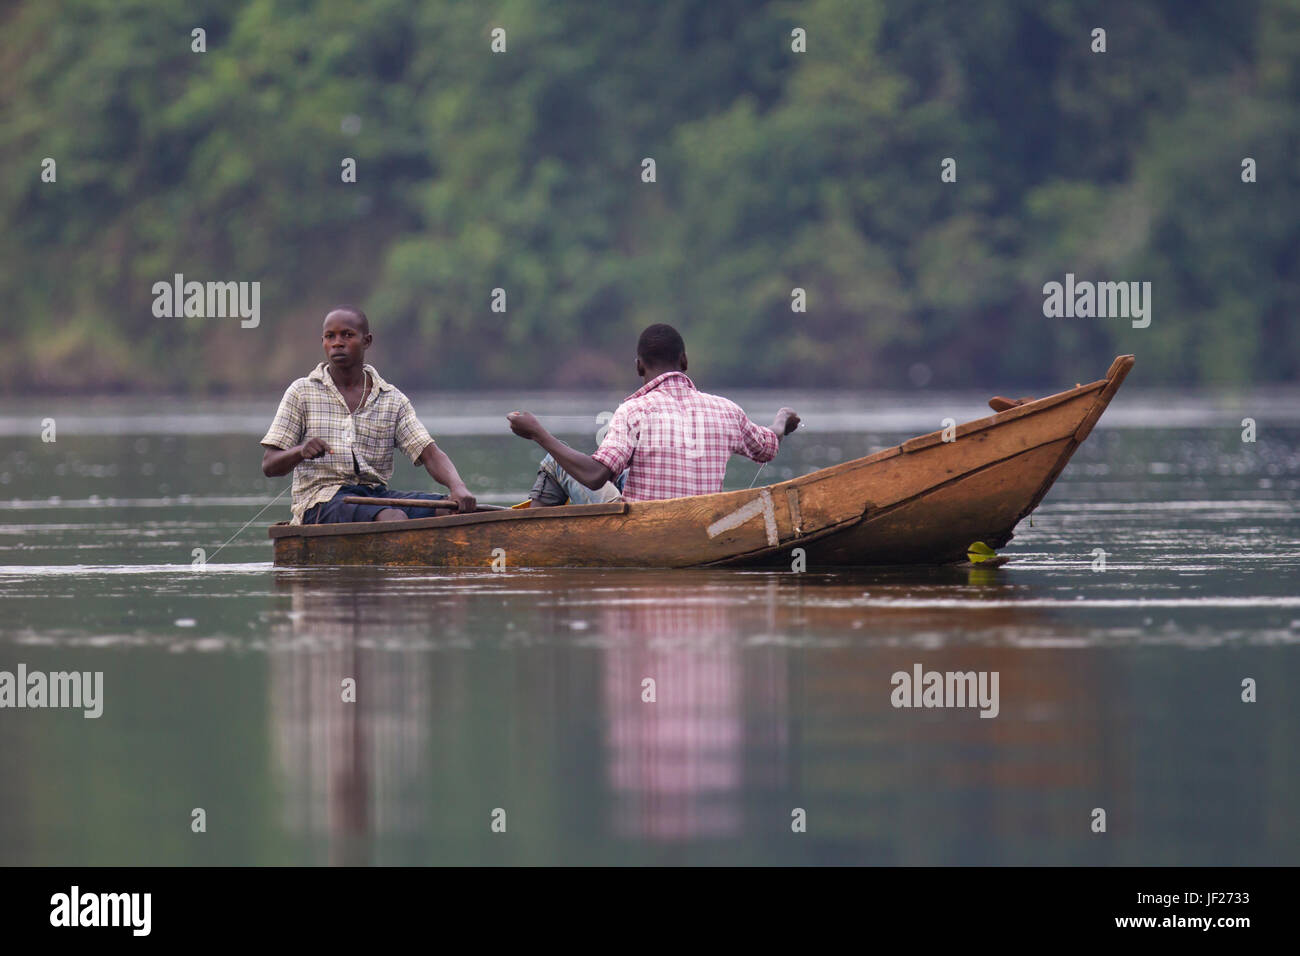 Two men fish by hand from a small wooden boat at the source of the Nile River, Jinja, Jinja District, Uganda. Stock Photo